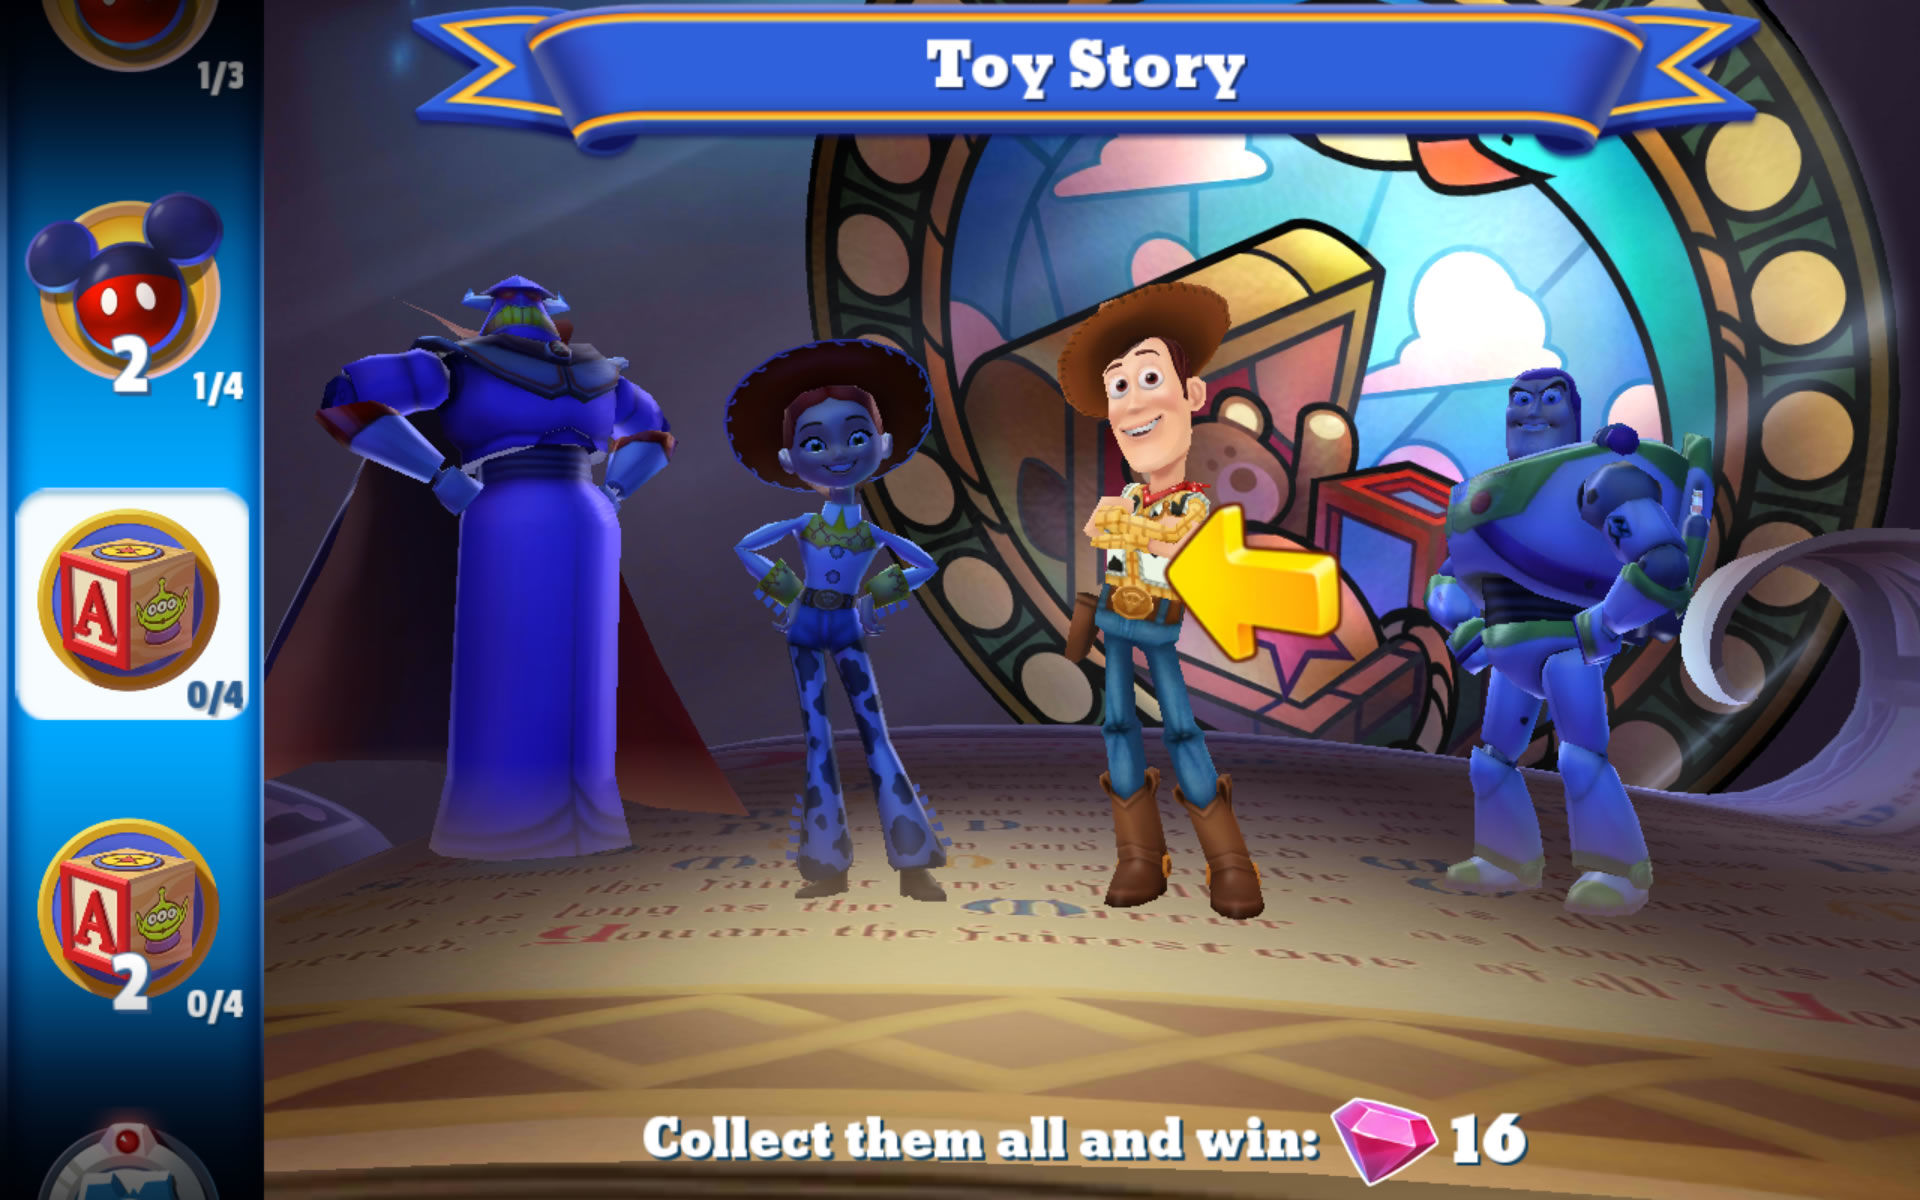 Toy Story characters in the game